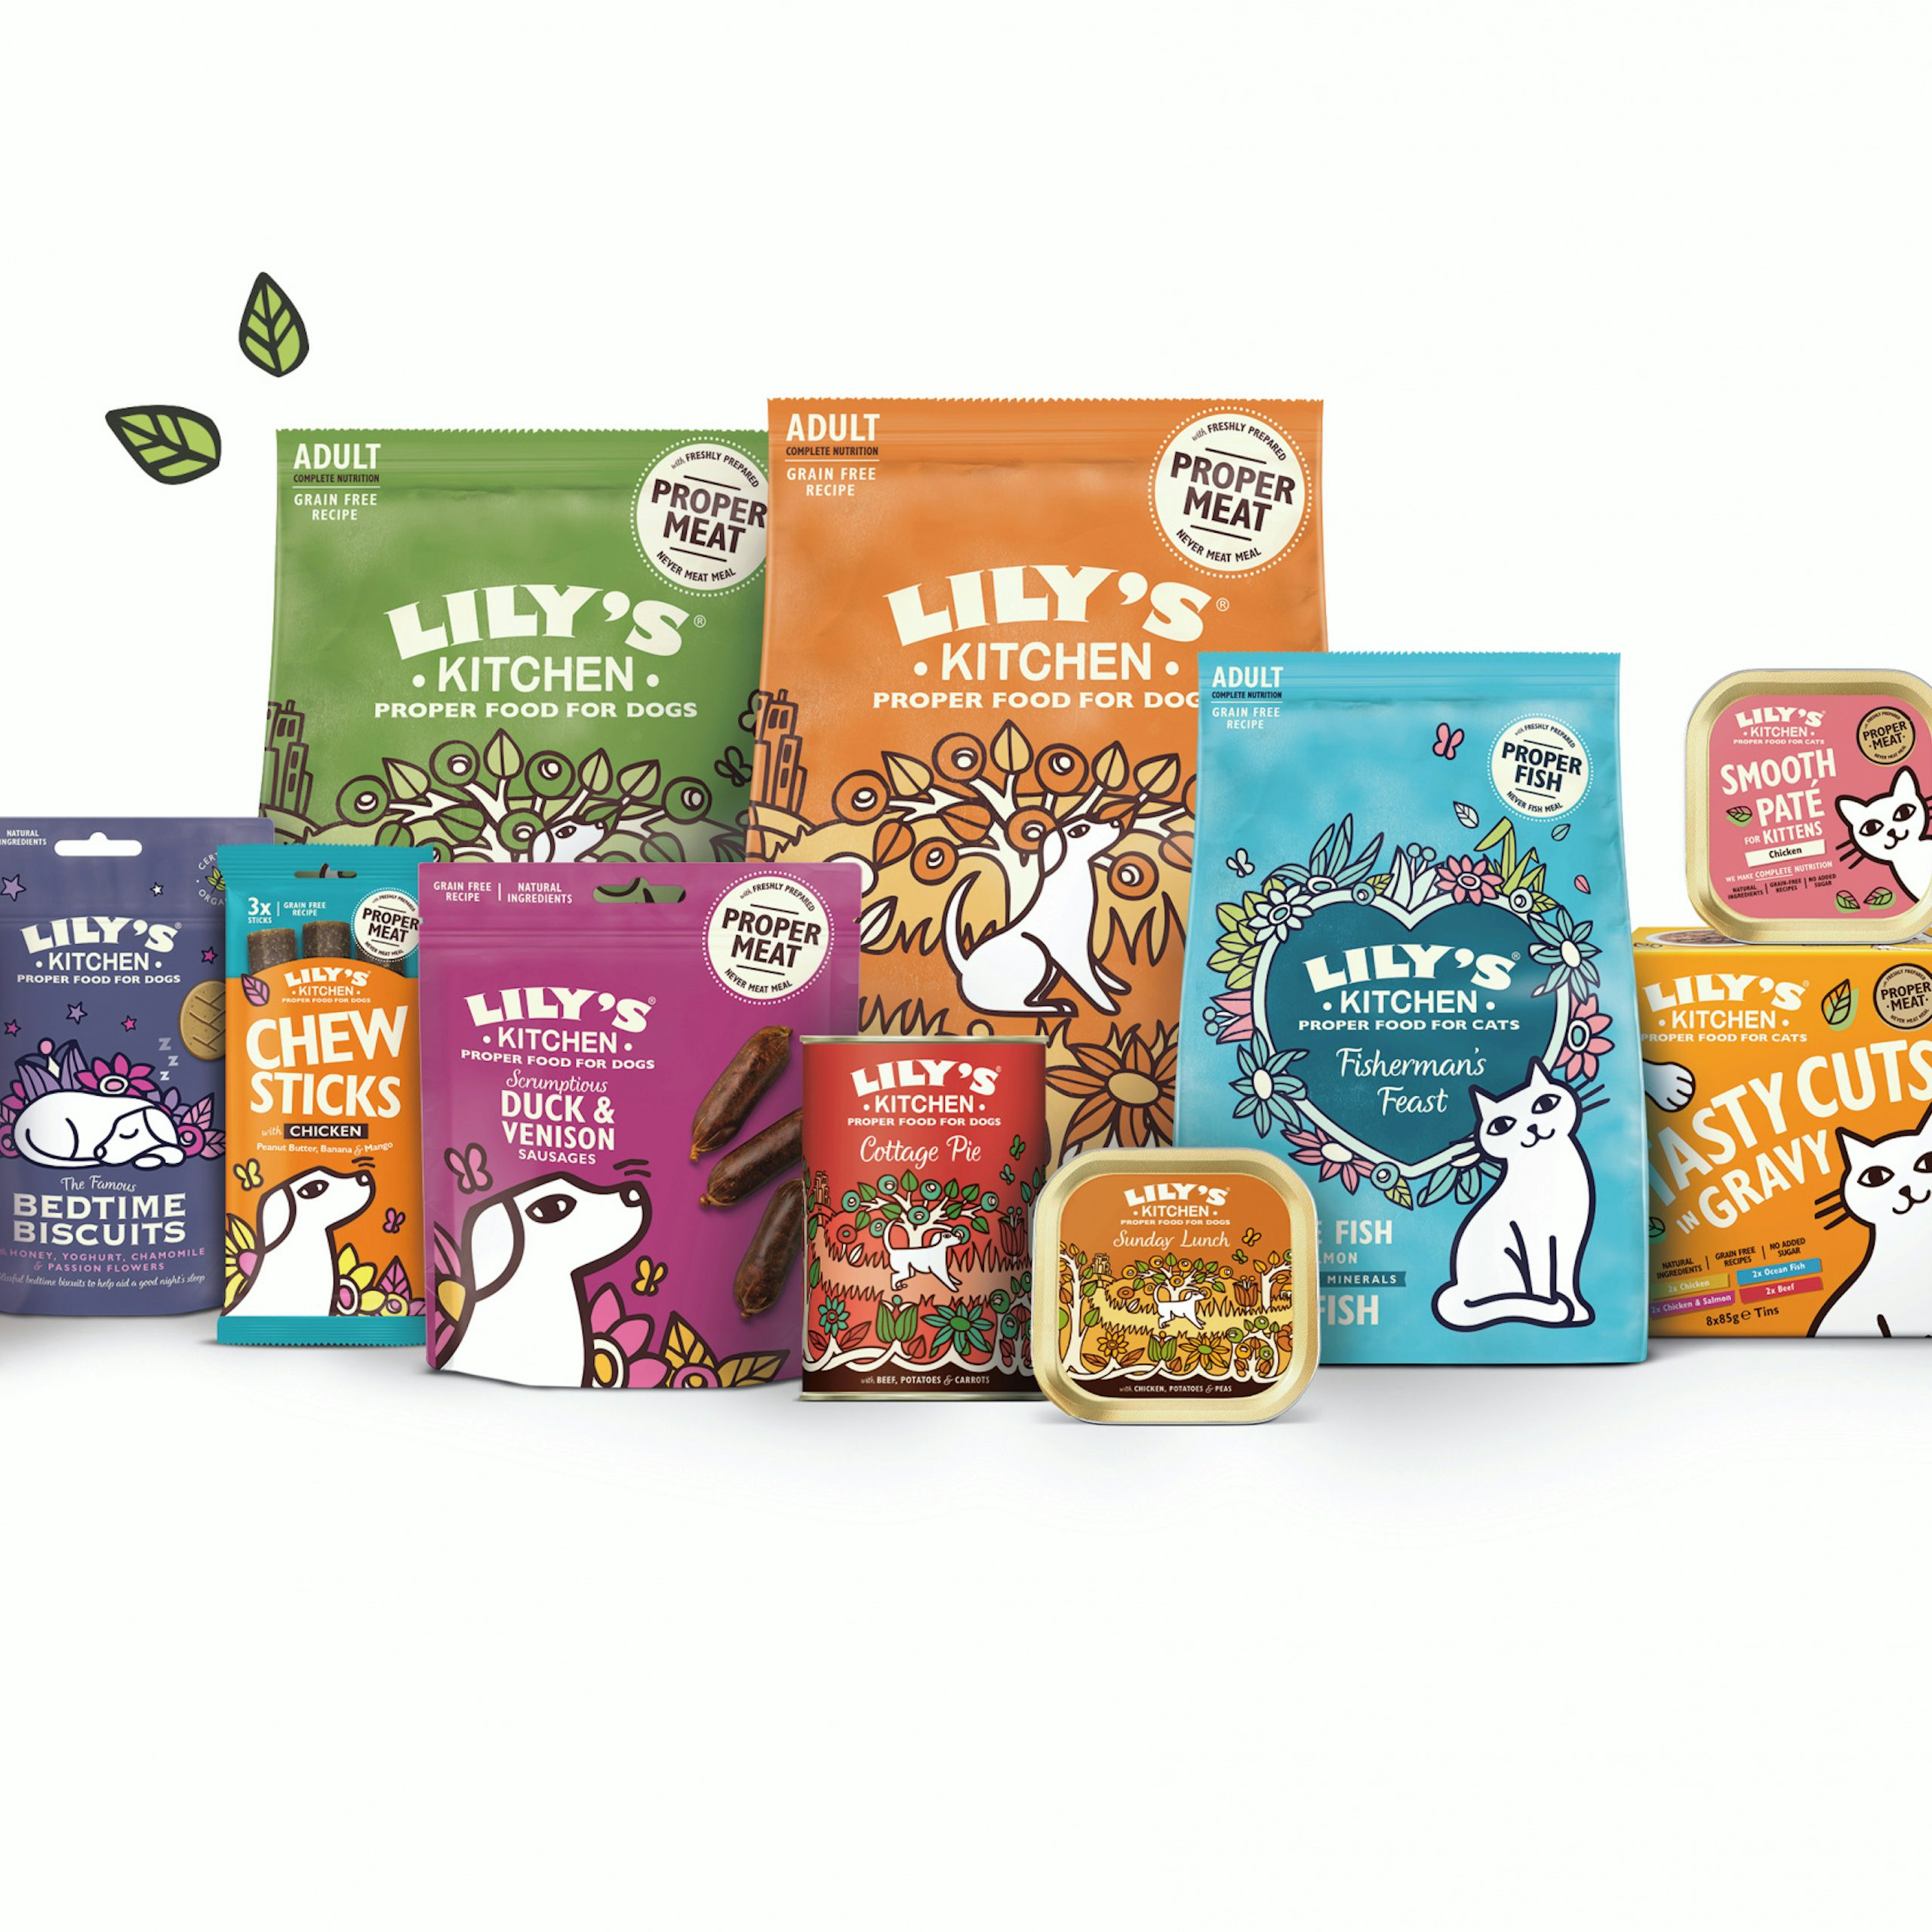 LilysKitchen Dogfood Scaled ?auto=compress,format&q=60&w=2560&h=2560